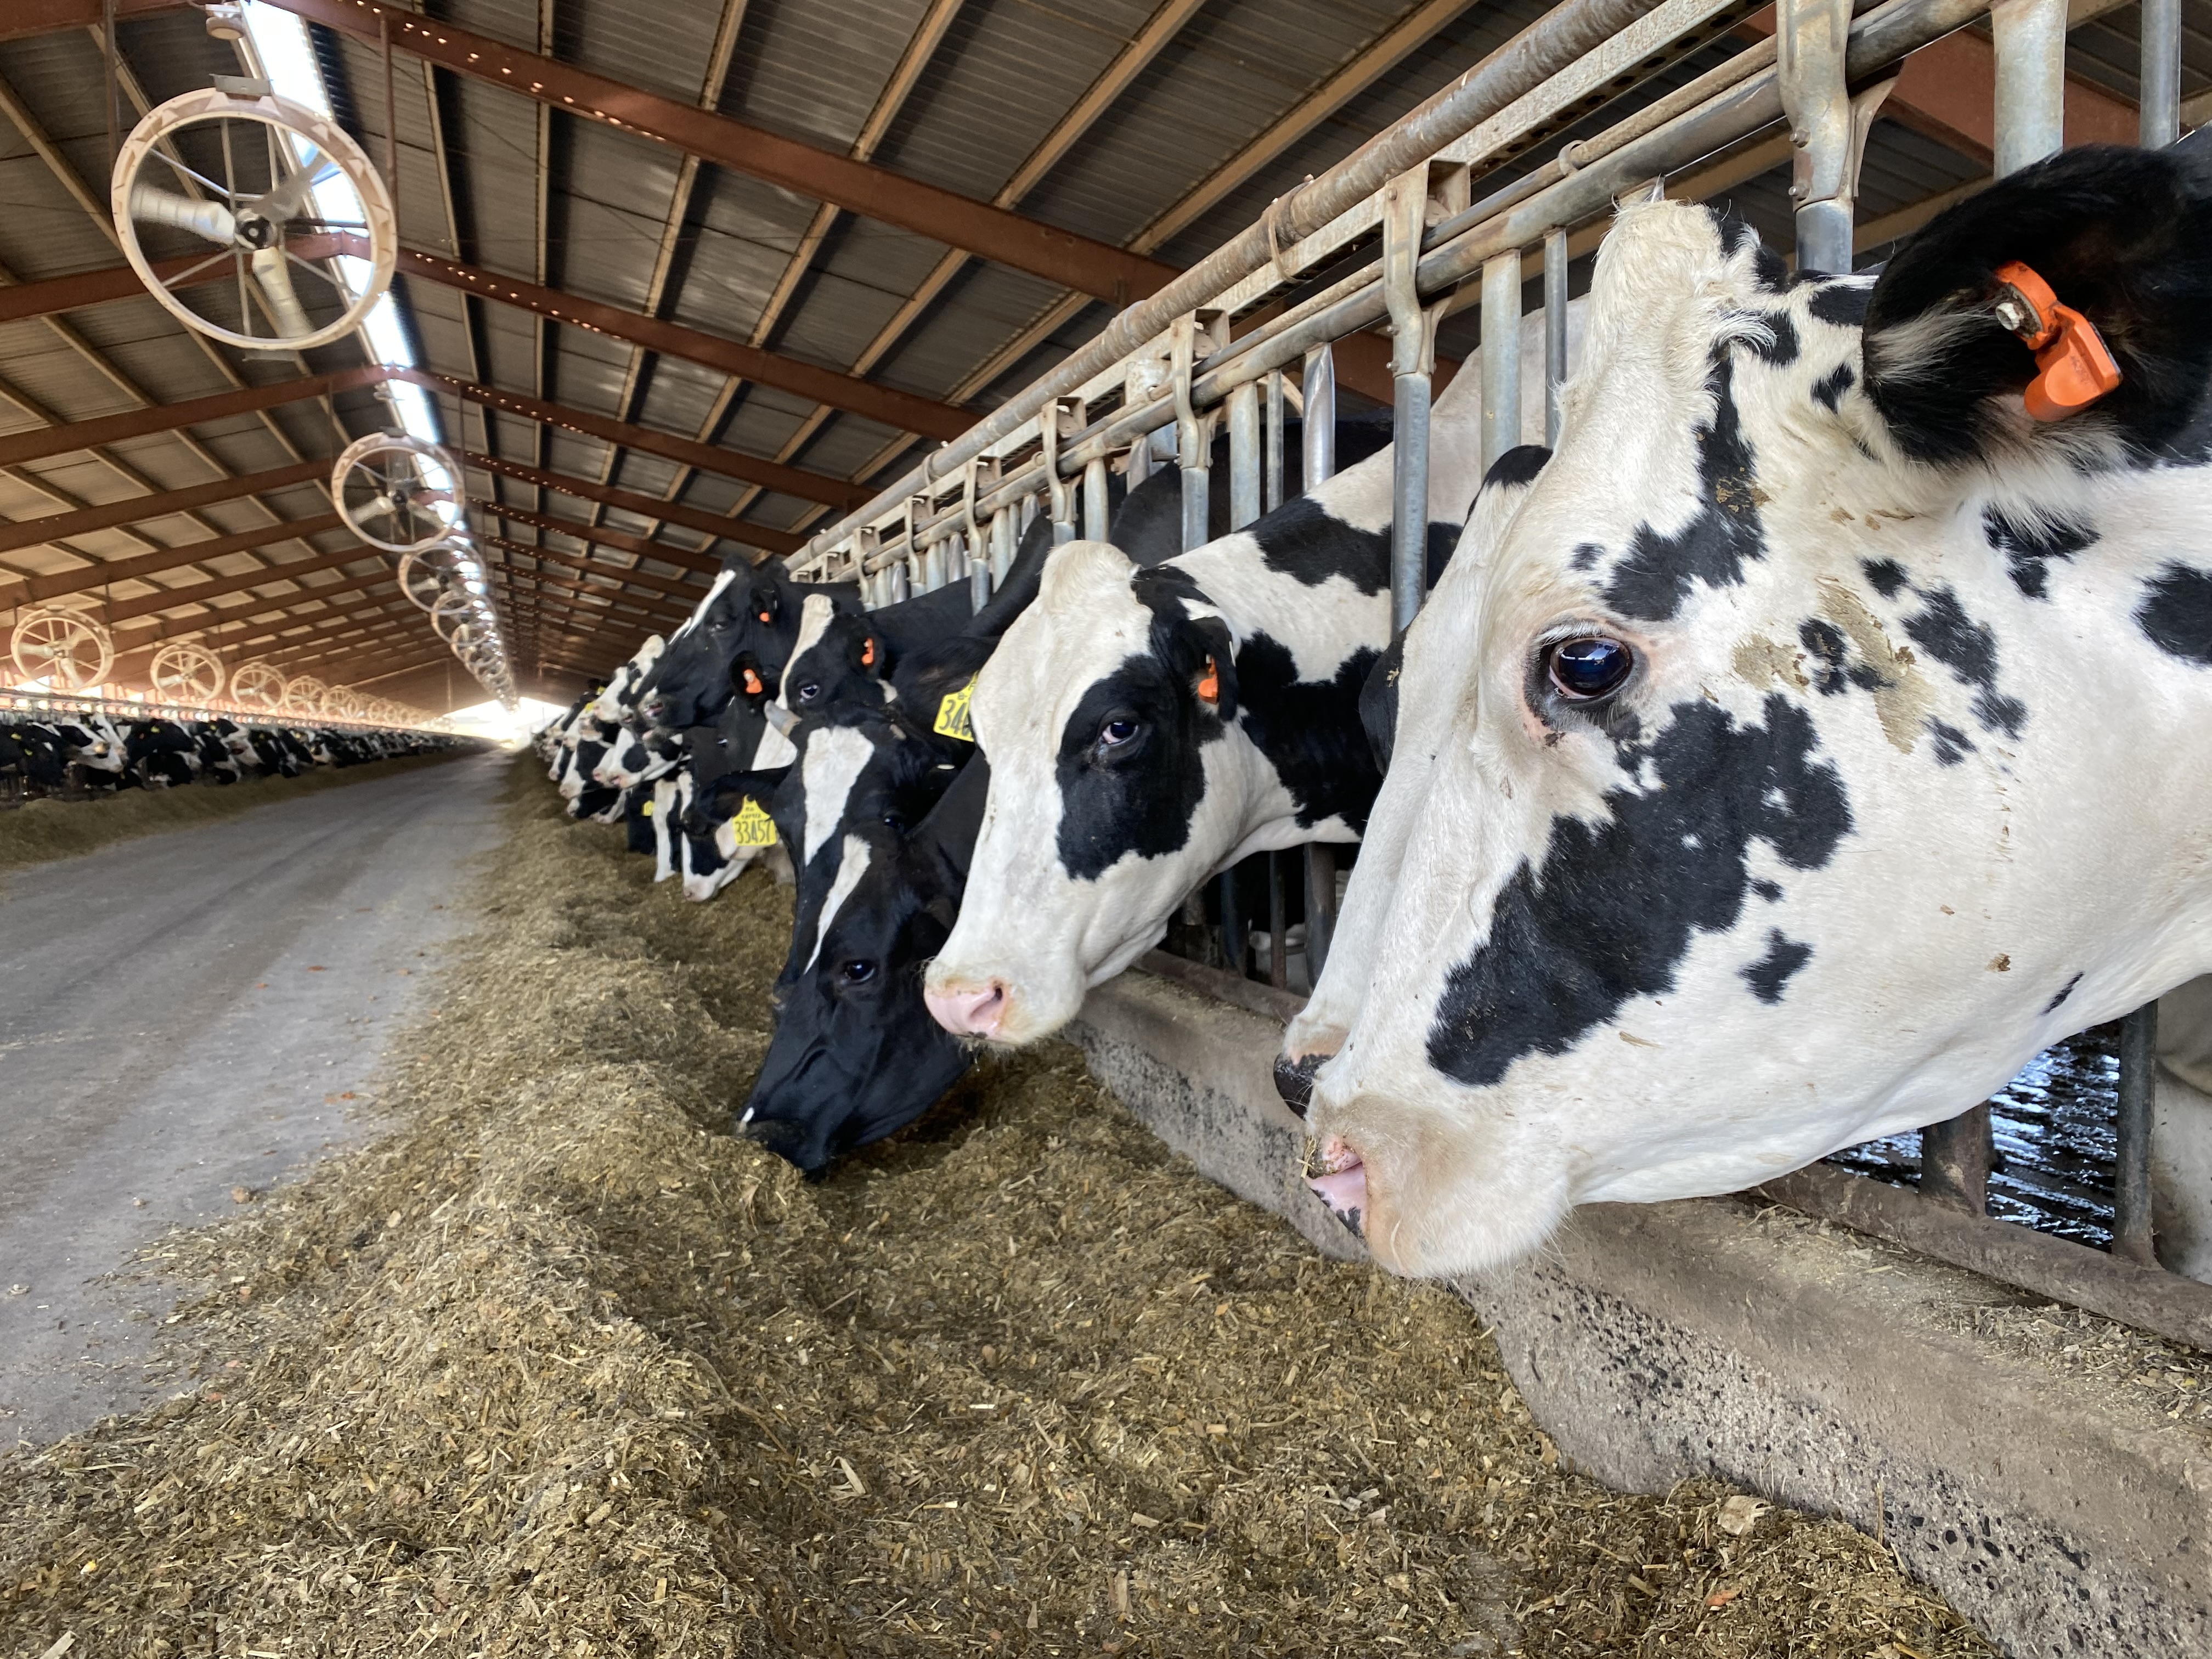 Fans, water soakers and shade help keep milk cows cooler during extreme heat. These cows also wear orange-colored trackers in their ears so the farmers can see if they are acting normal, or if they are heat stressed